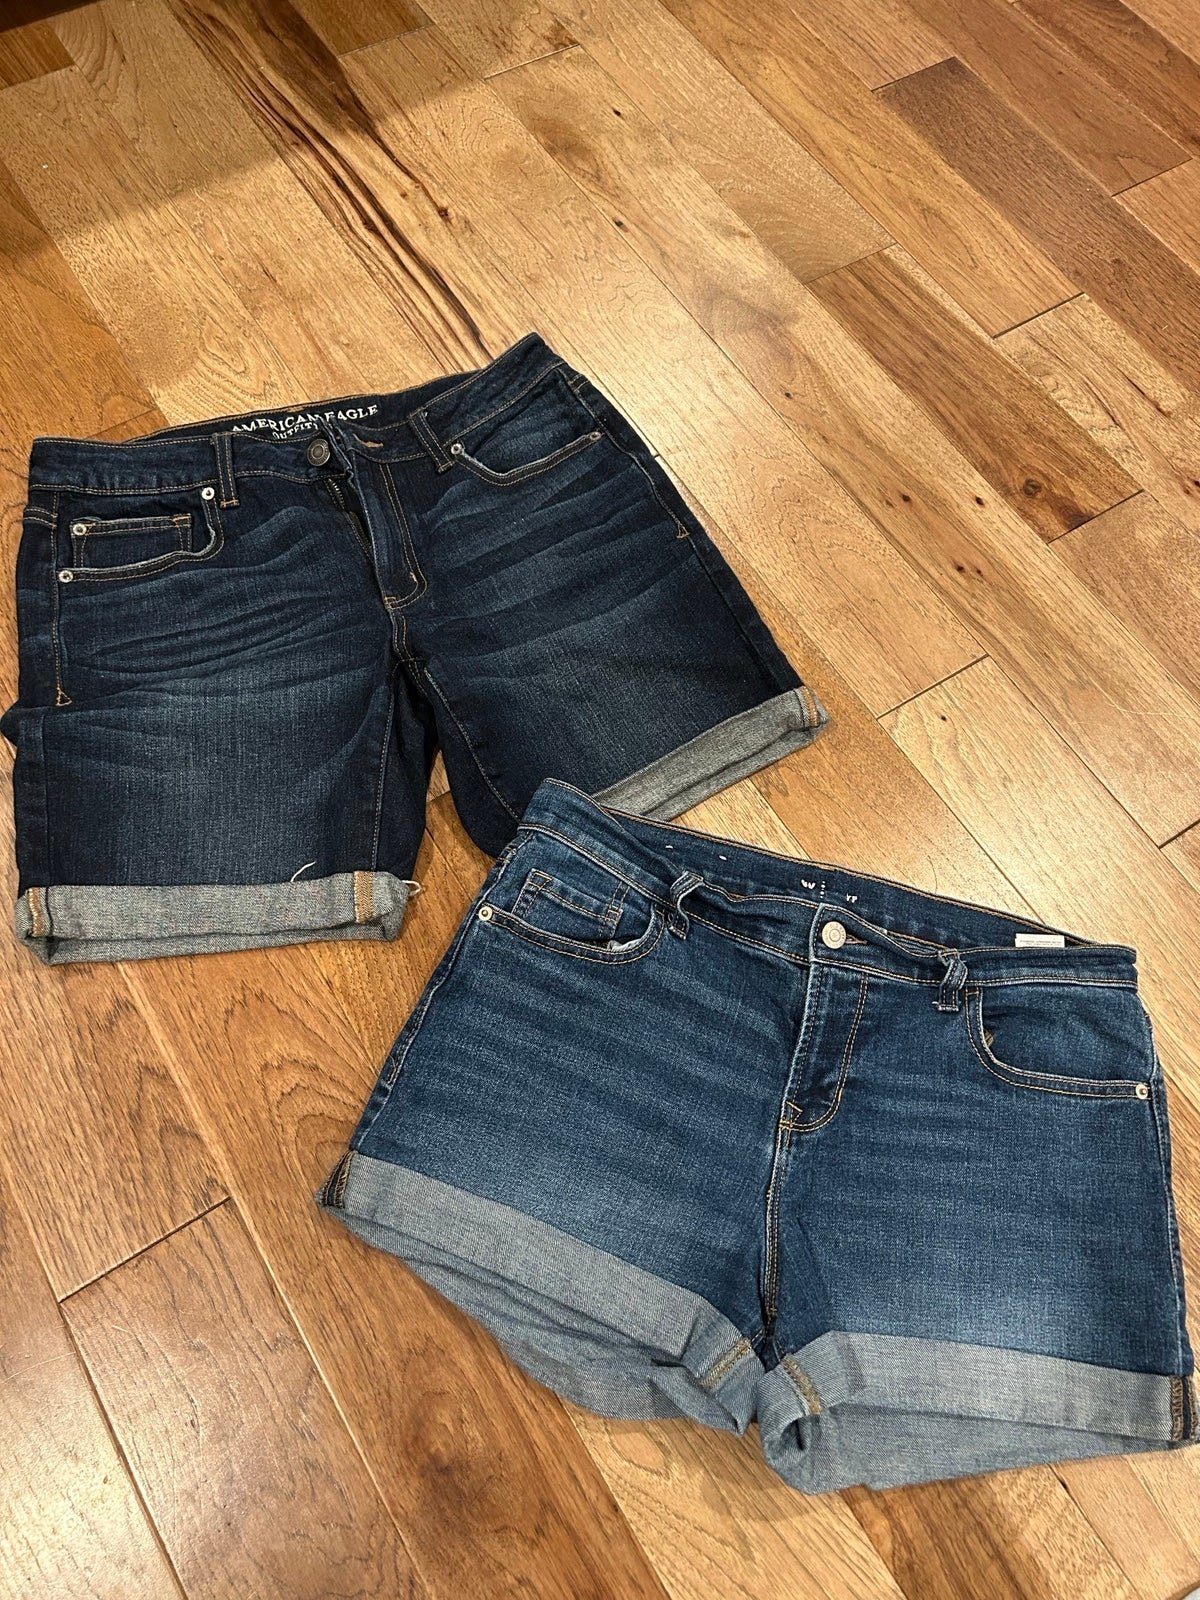 Affordable Jean Shorts women’s size 6 fukB9snBY online store